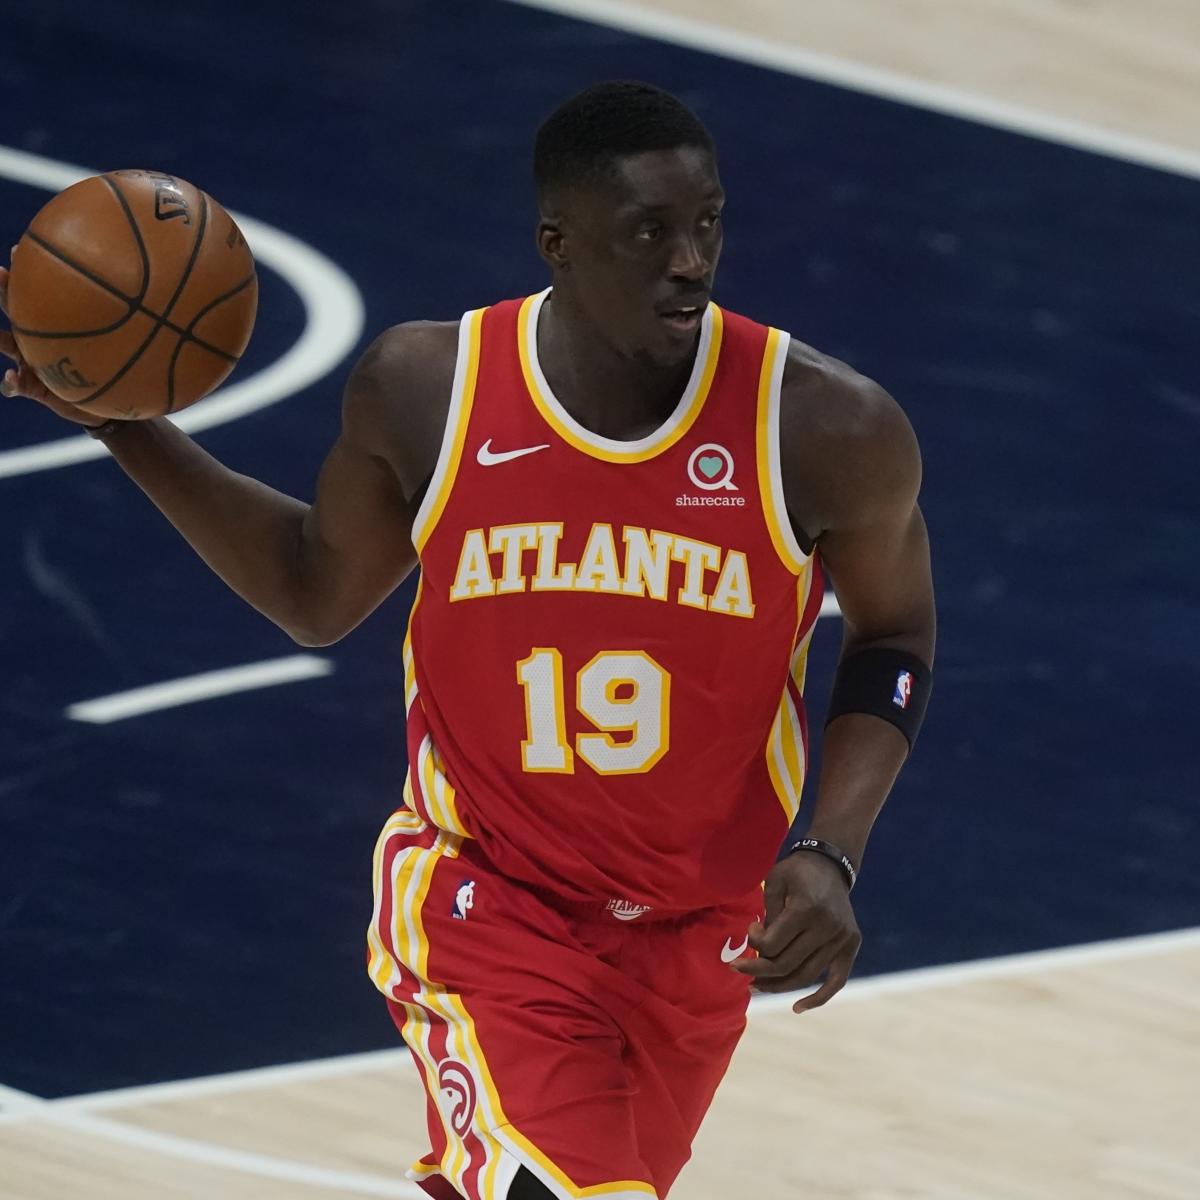 Tony Snell Agrees to 1-Year Contract with Blazers After 1 Season with Hawks